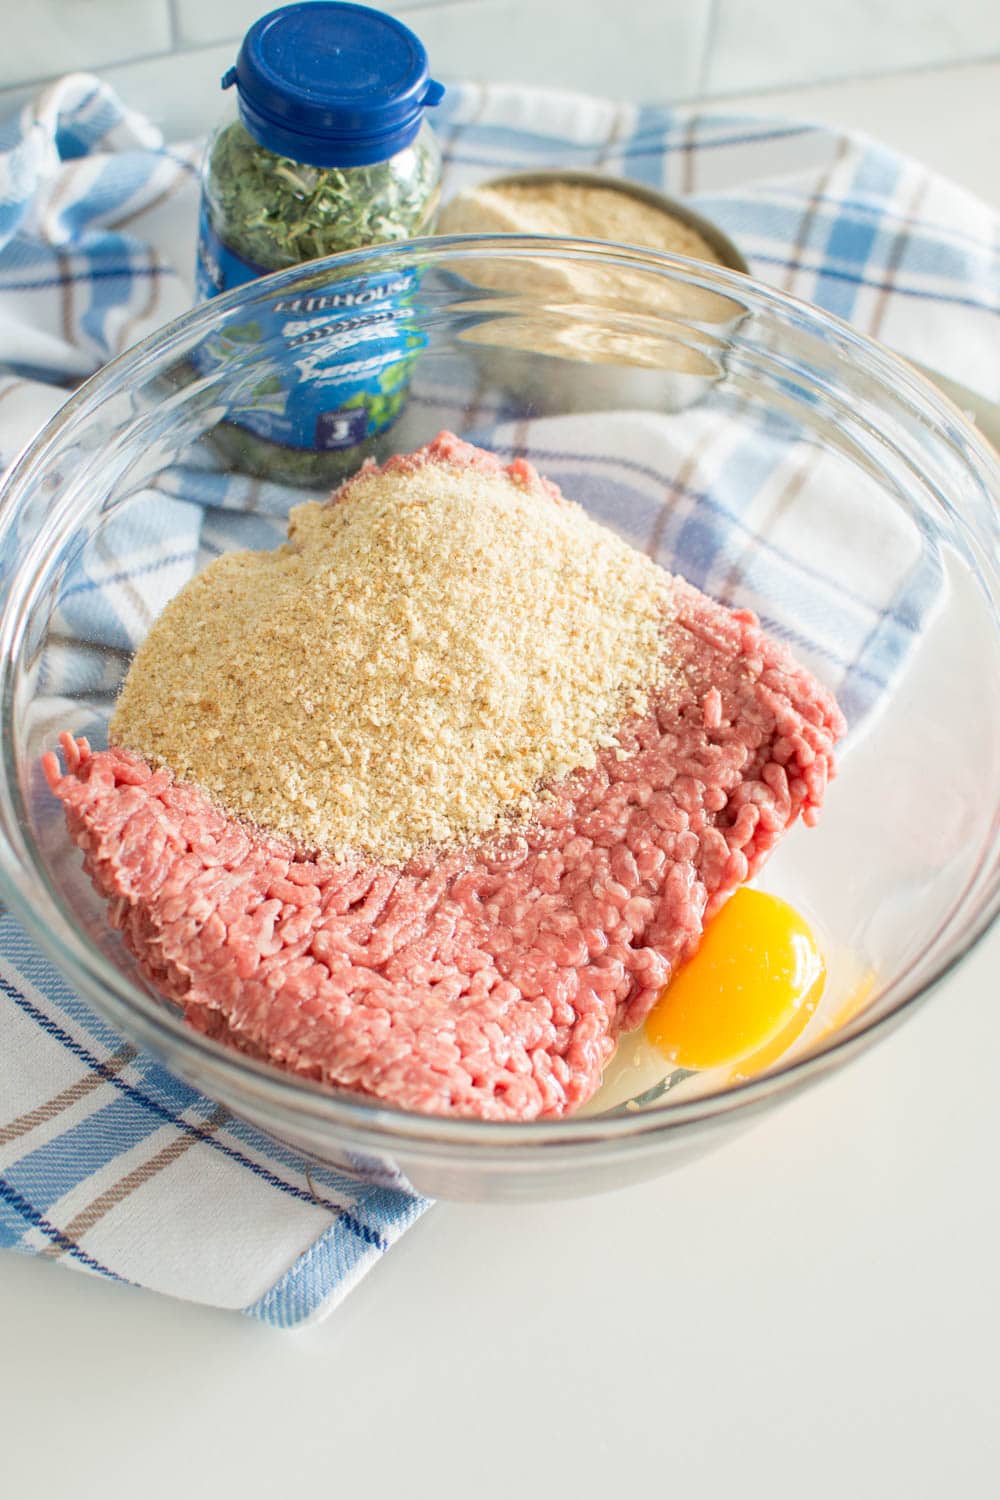 Raw ground beef with breadcrumbs and an egg in a large glass bowl